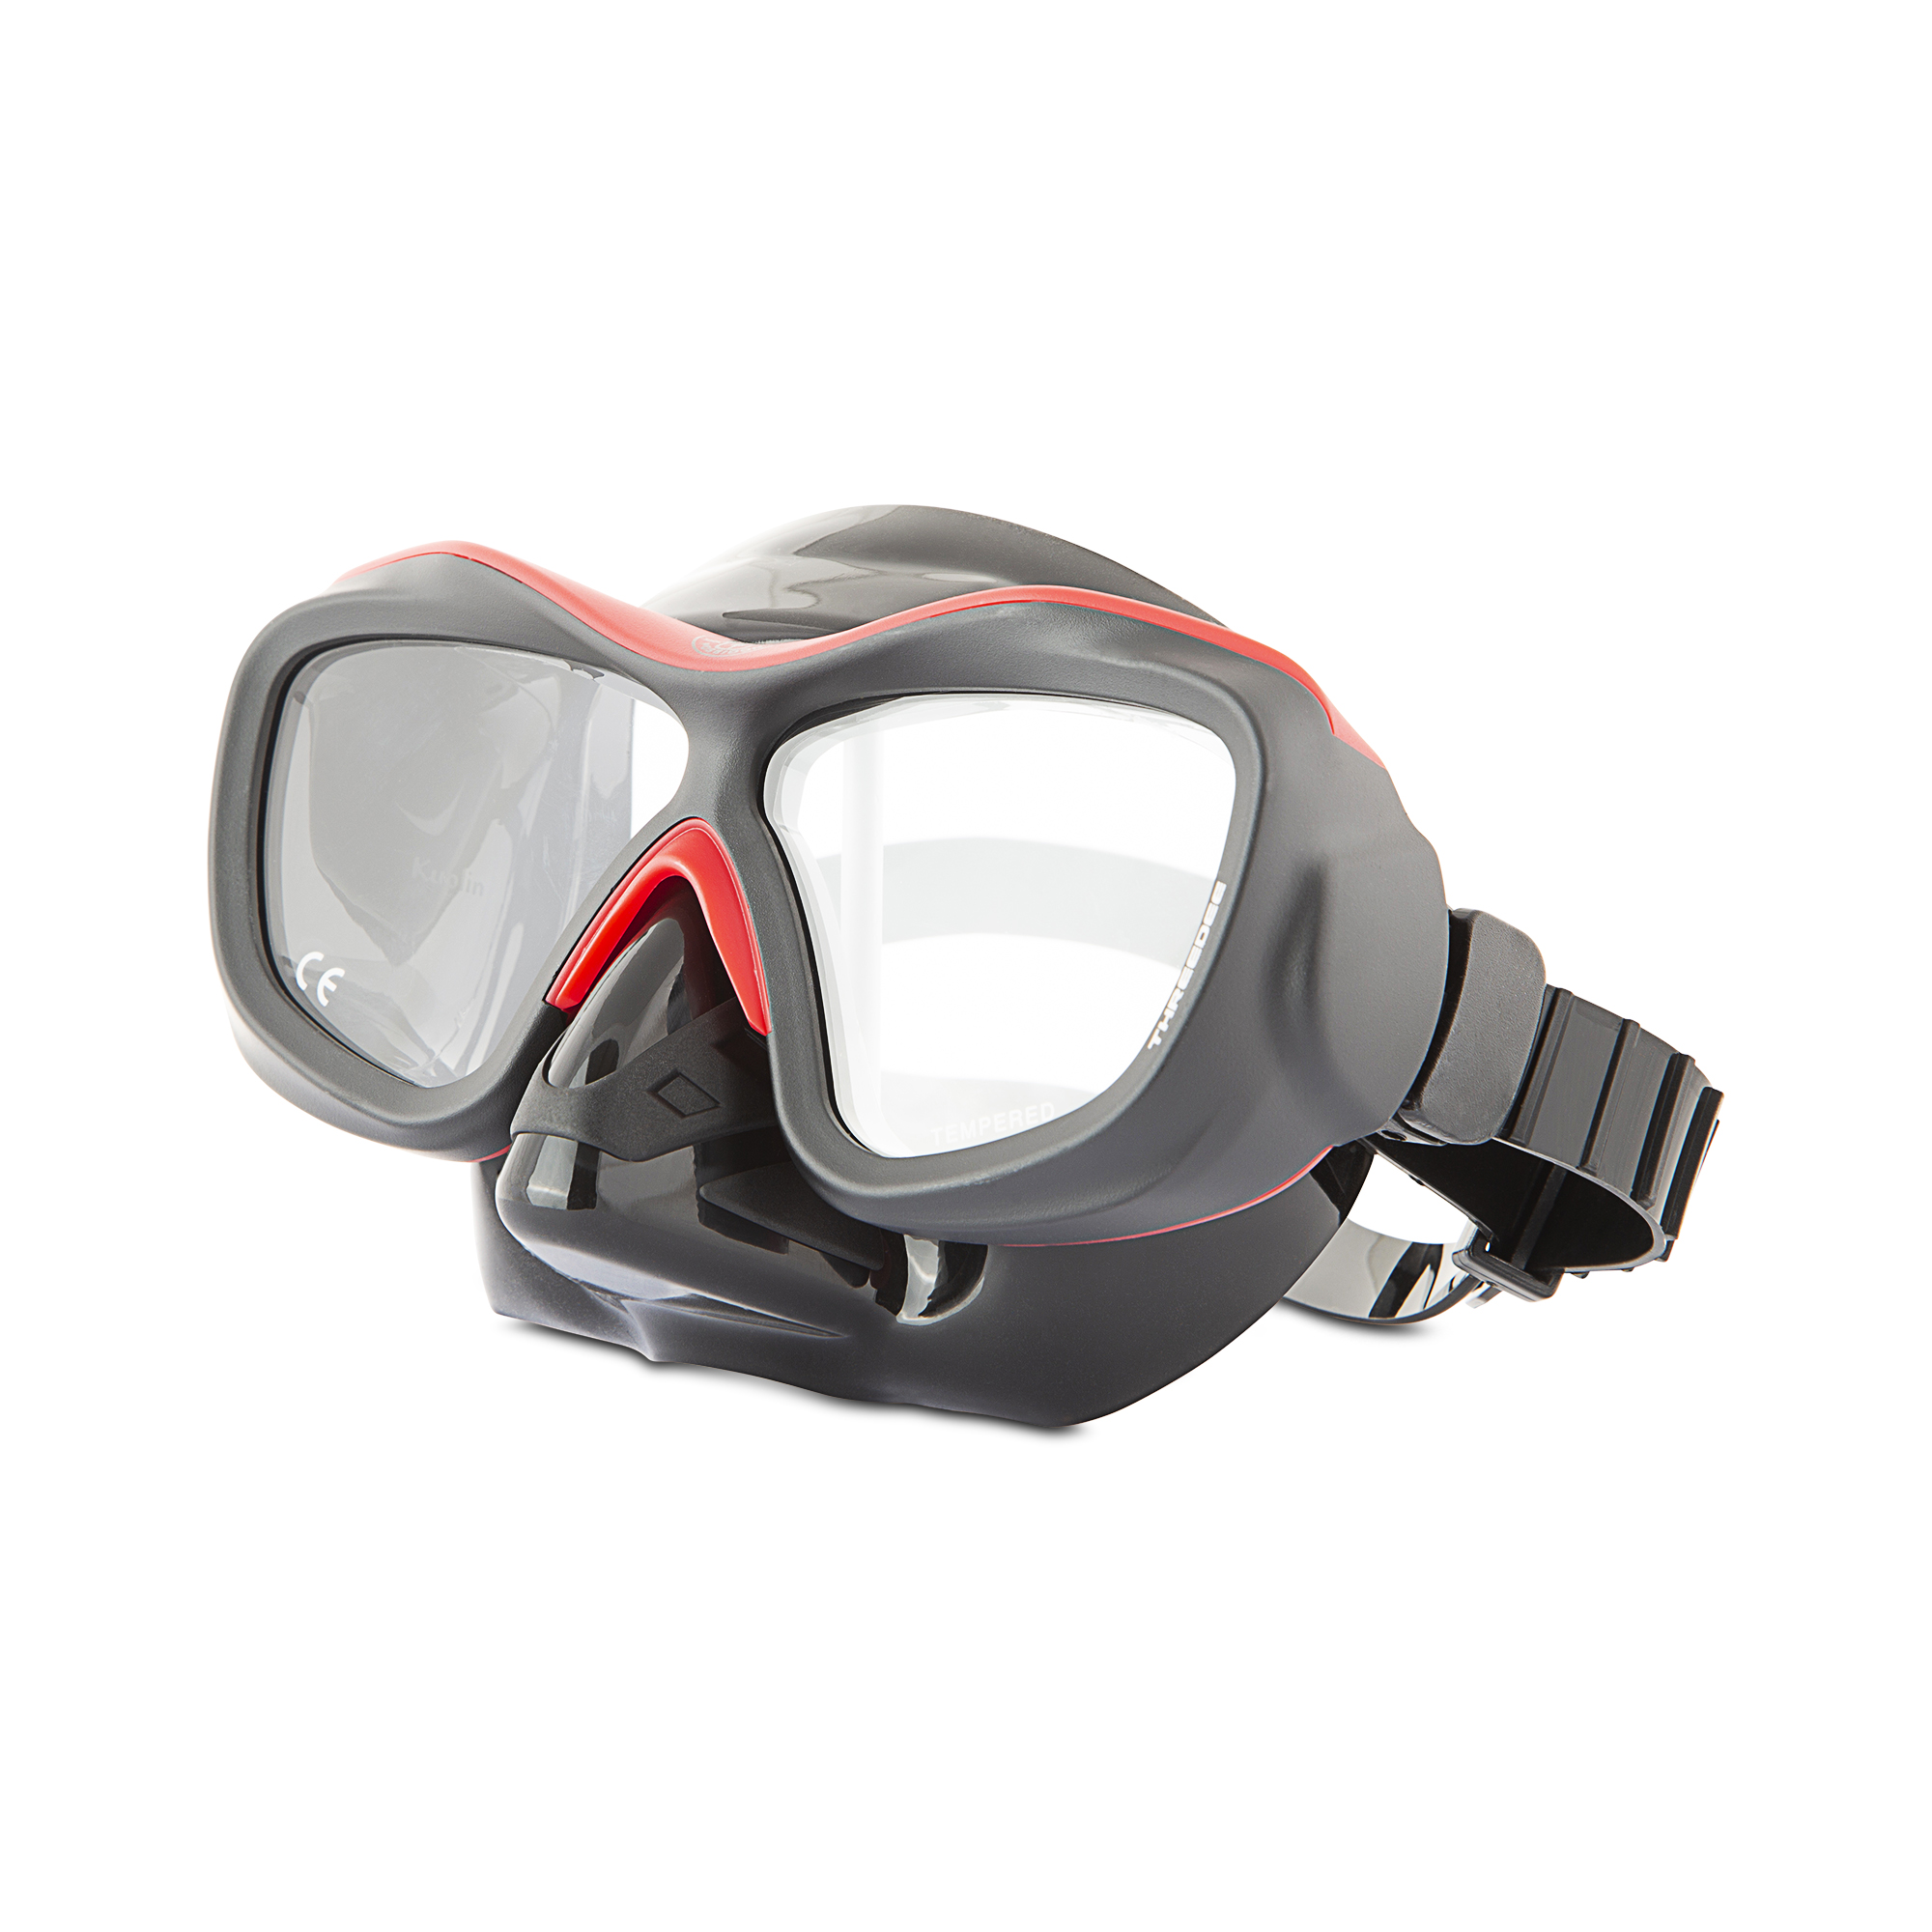 Mask 3D - Black/Red, Black Silicon